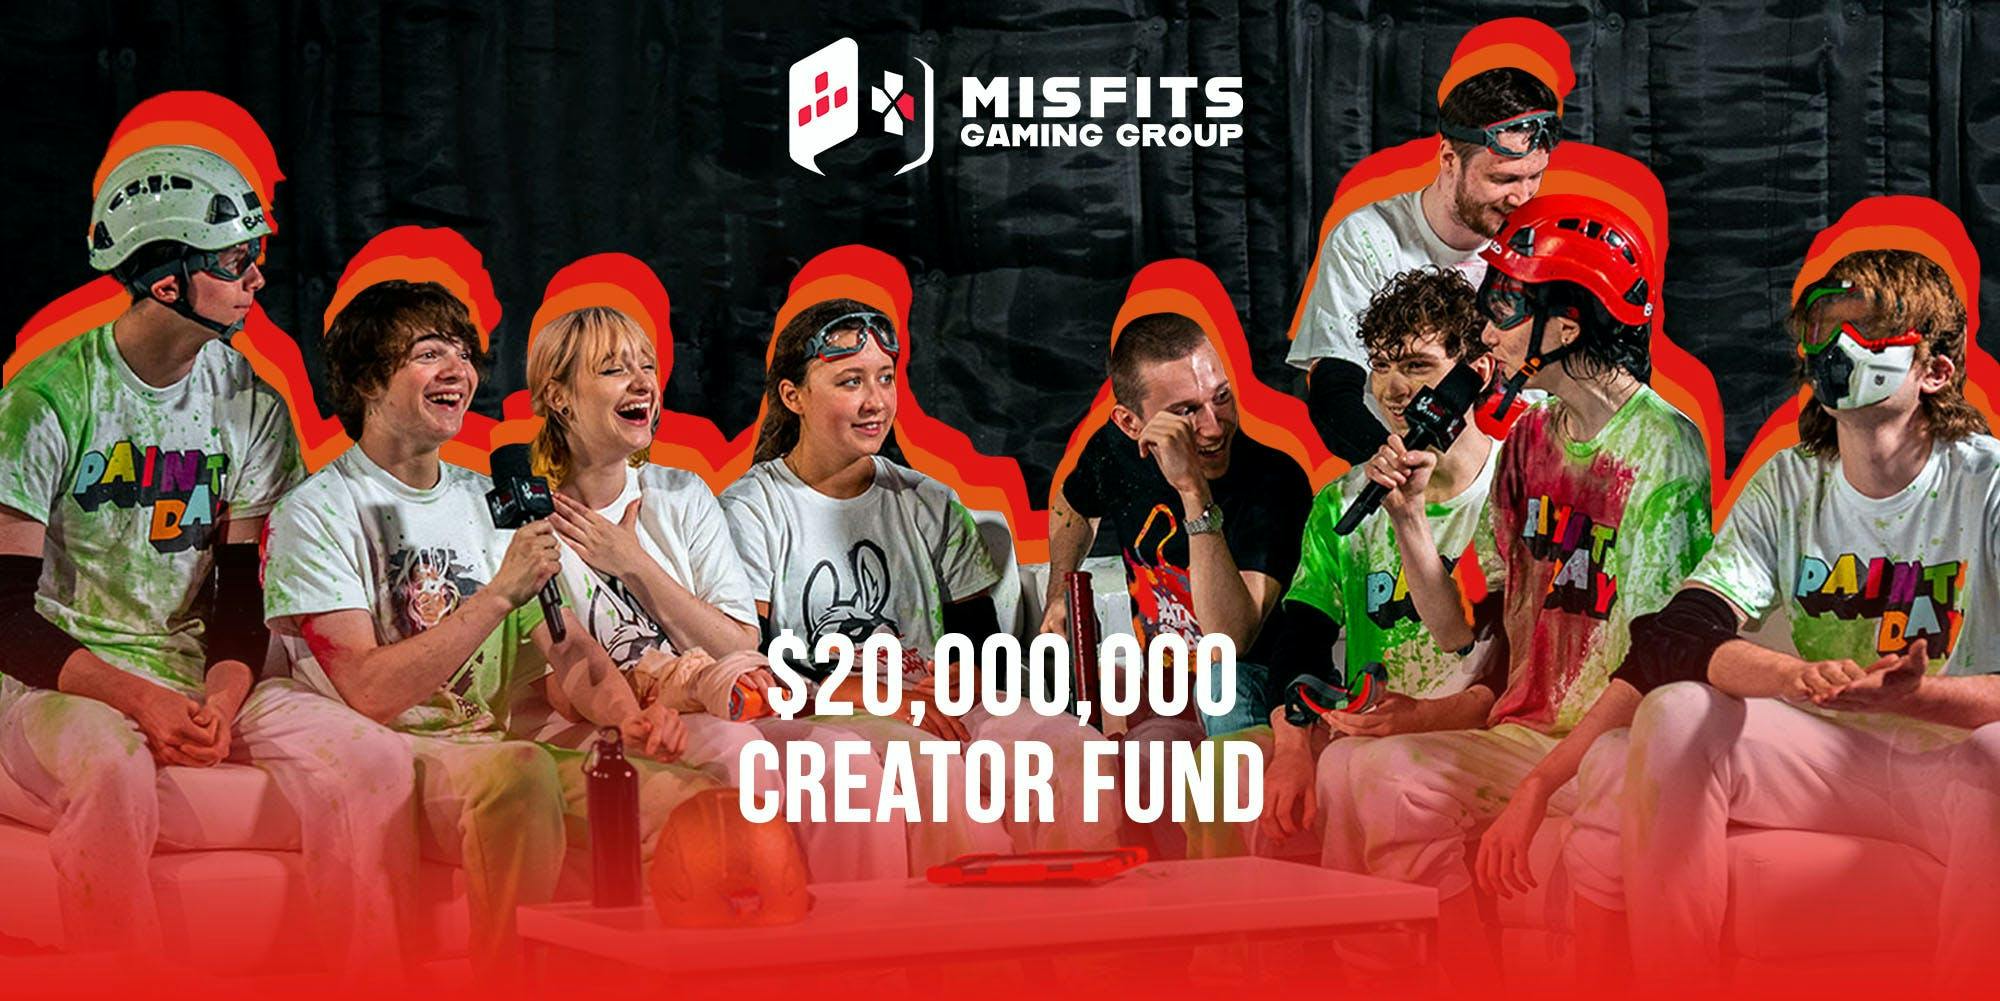 Misfits Gaming Group Launches $20 Million Fund To Support Ambitious Creator Projects